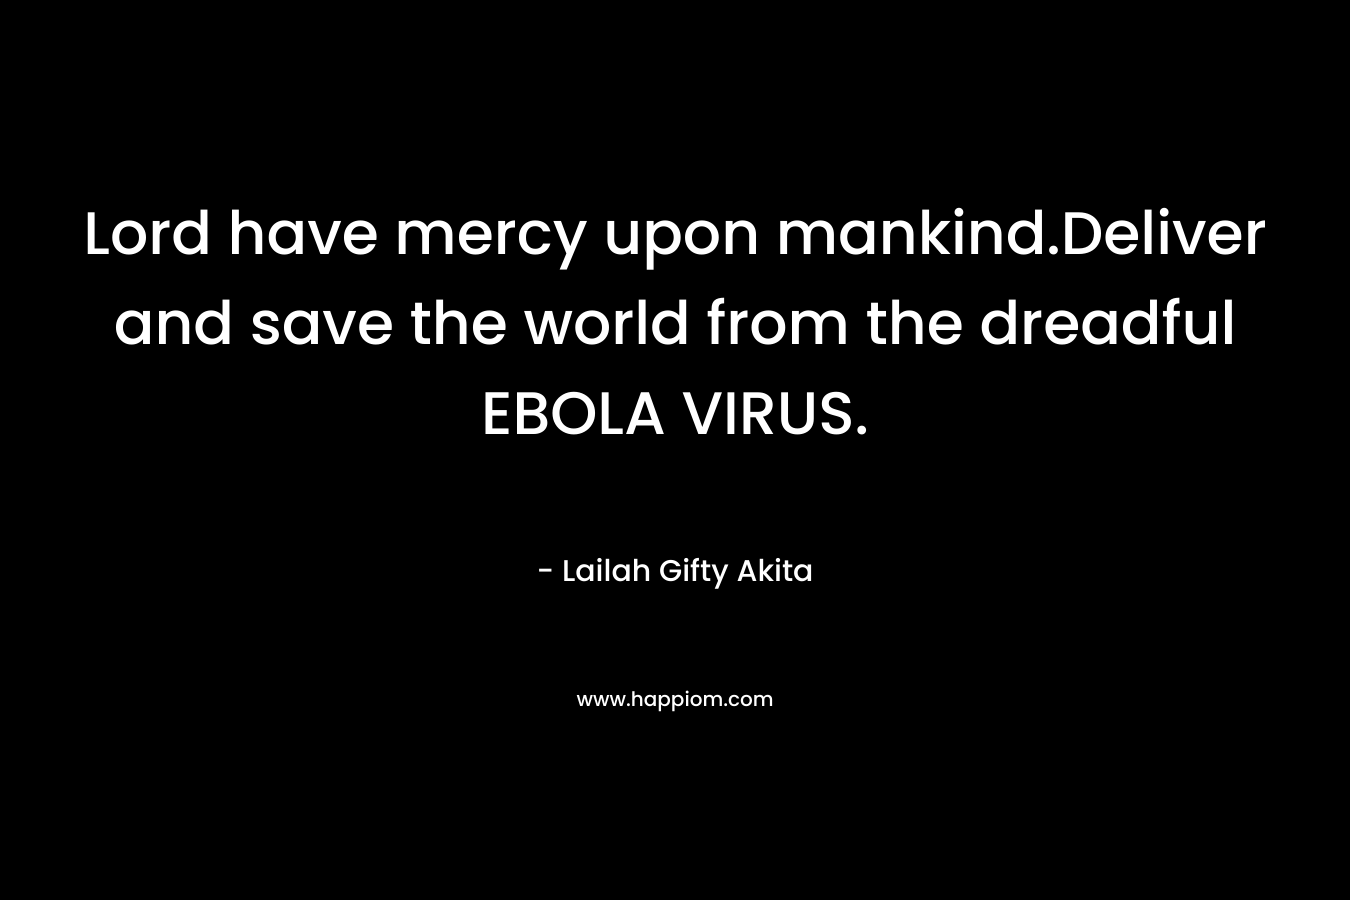 Lord have mercy upon mankind.Deliver and save the world from the dreadful EBOLA VIRUS. – Lailah Gifty Akita